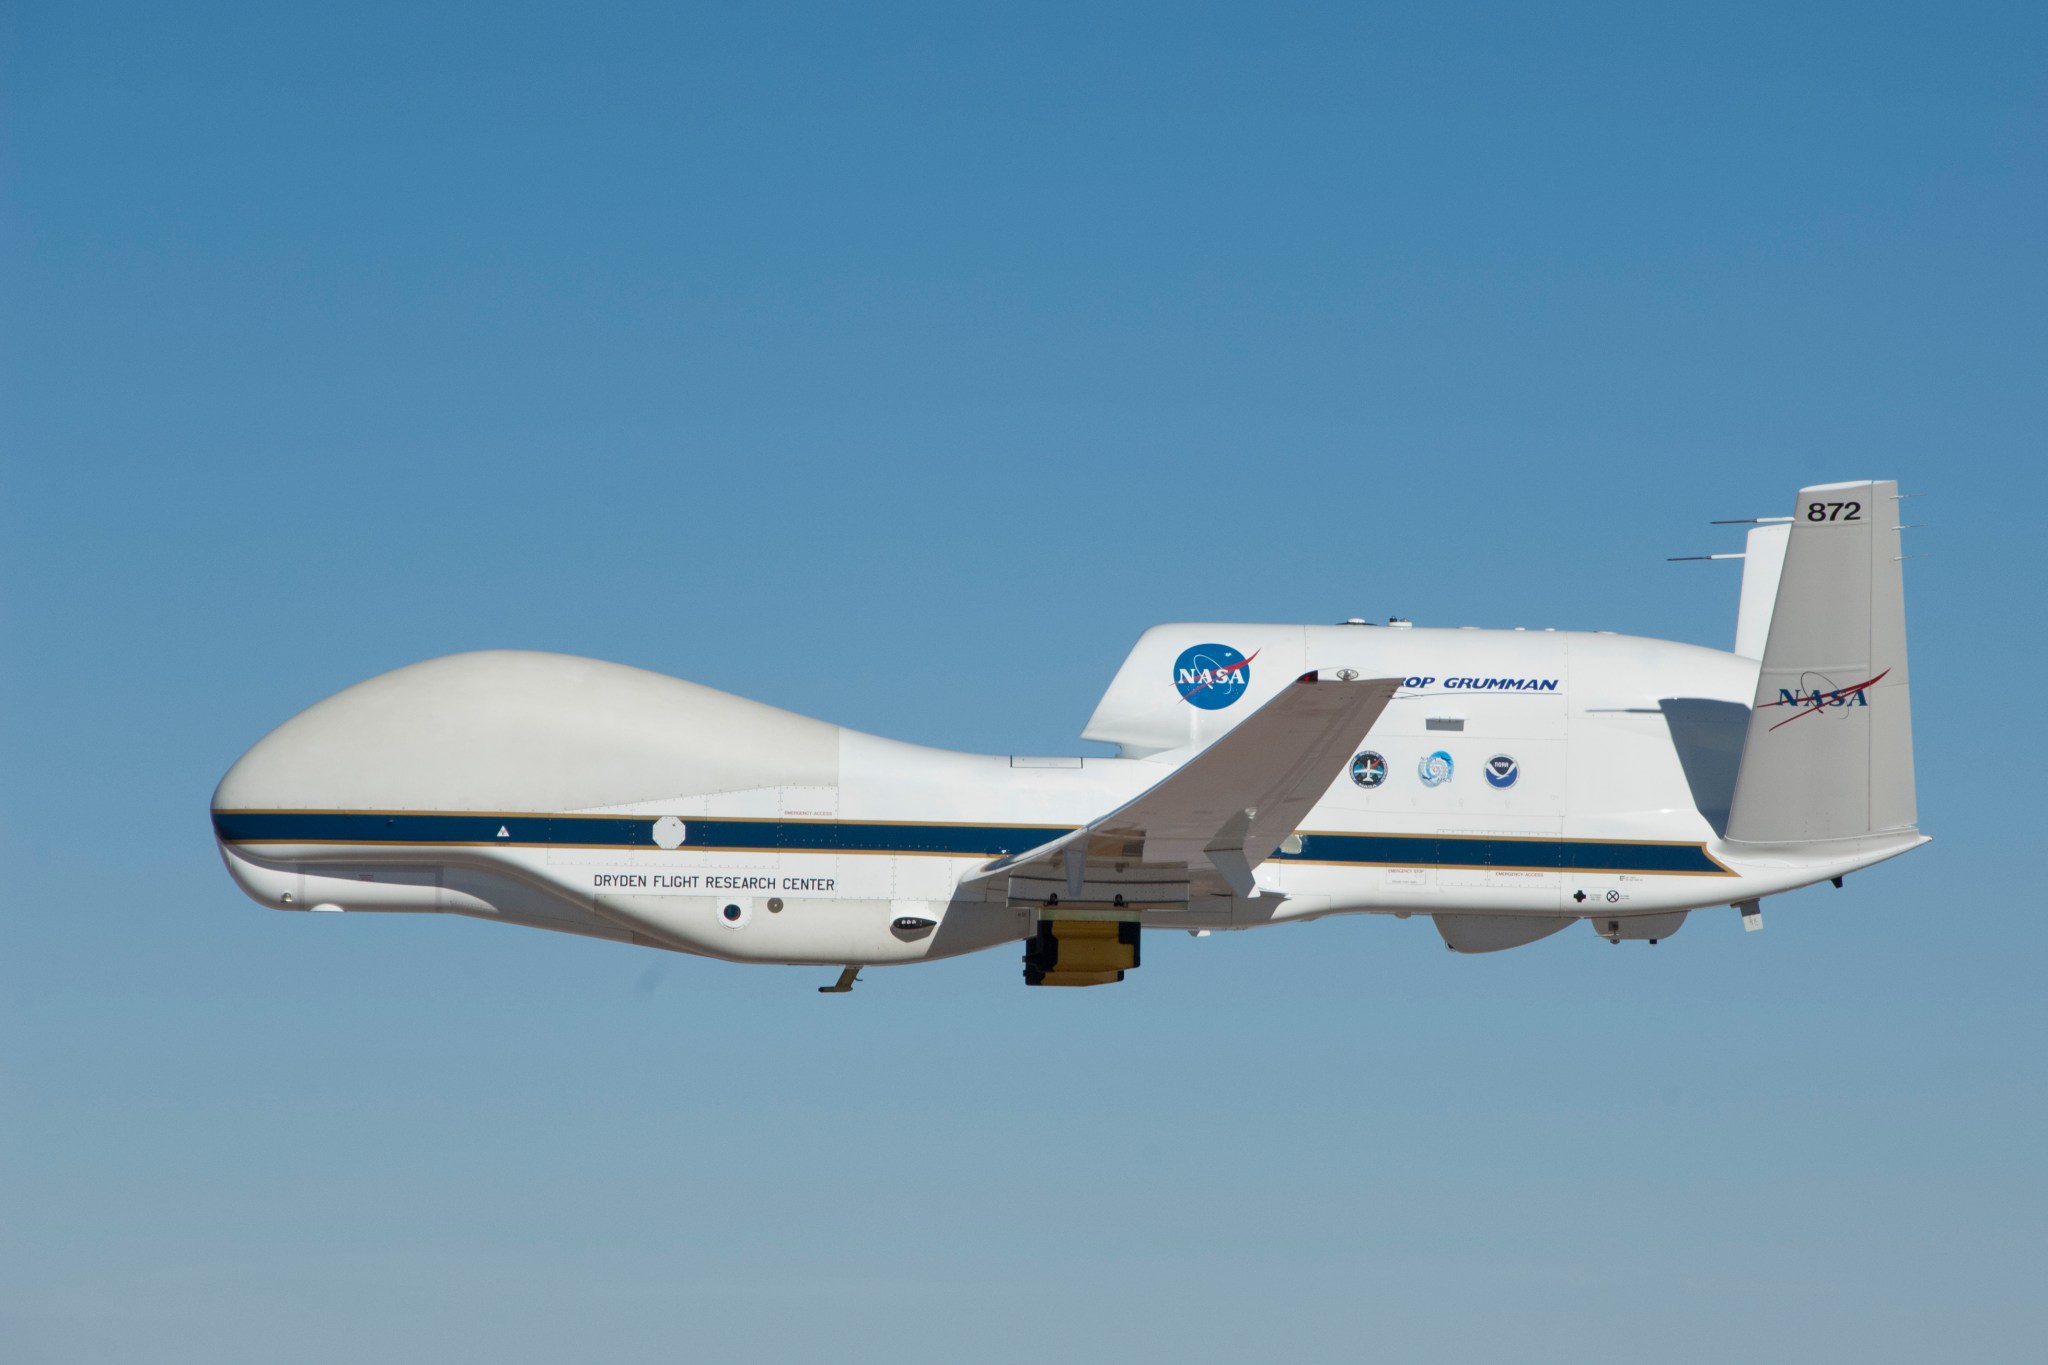 The two yellow-and-black pods under the wings of NASA Global Hawk No. 872 house atmospheric measurement probes.